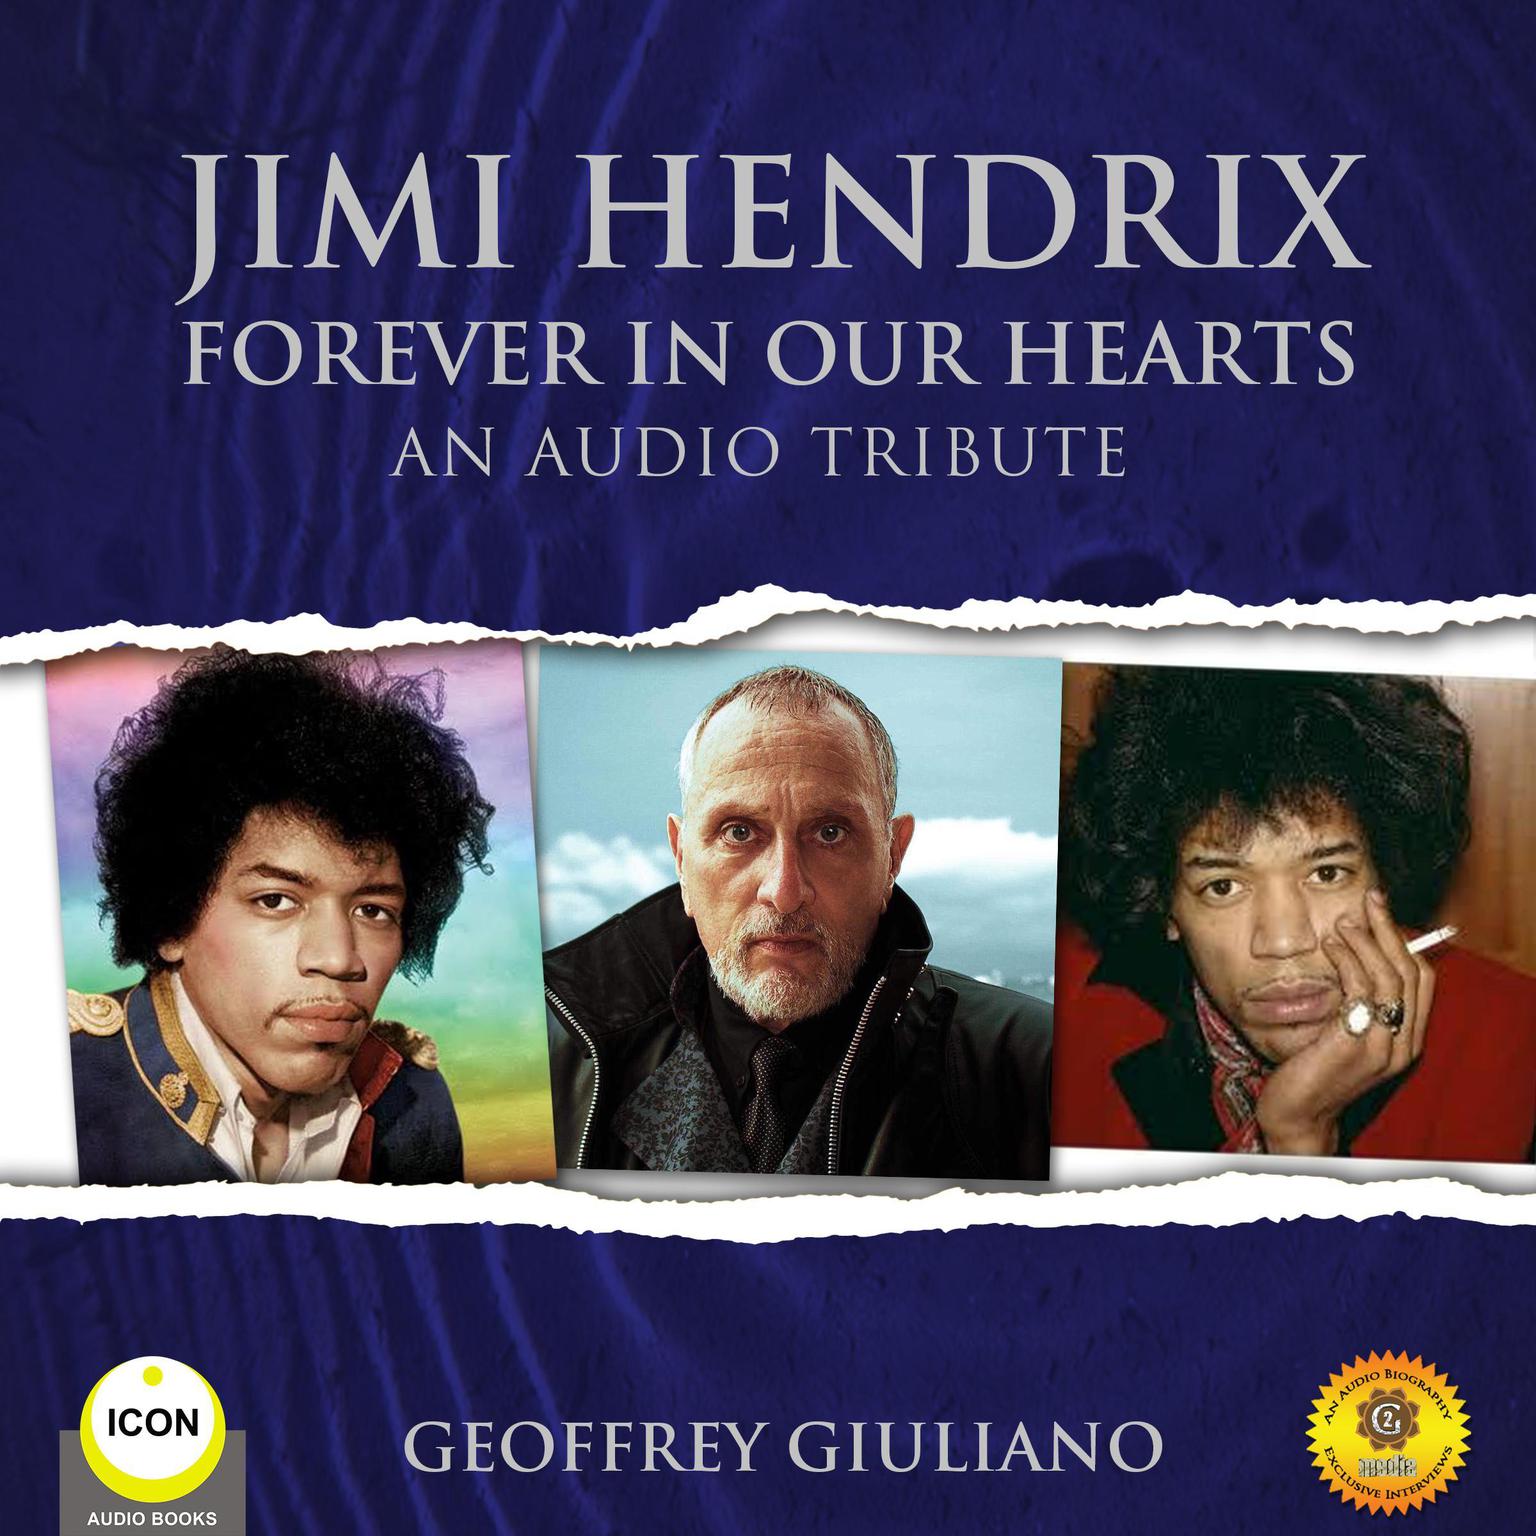 Jimi Hendrix Forever in Our Hearts - An Audio Tribute Audiobook, by Geoffrey Giuliano